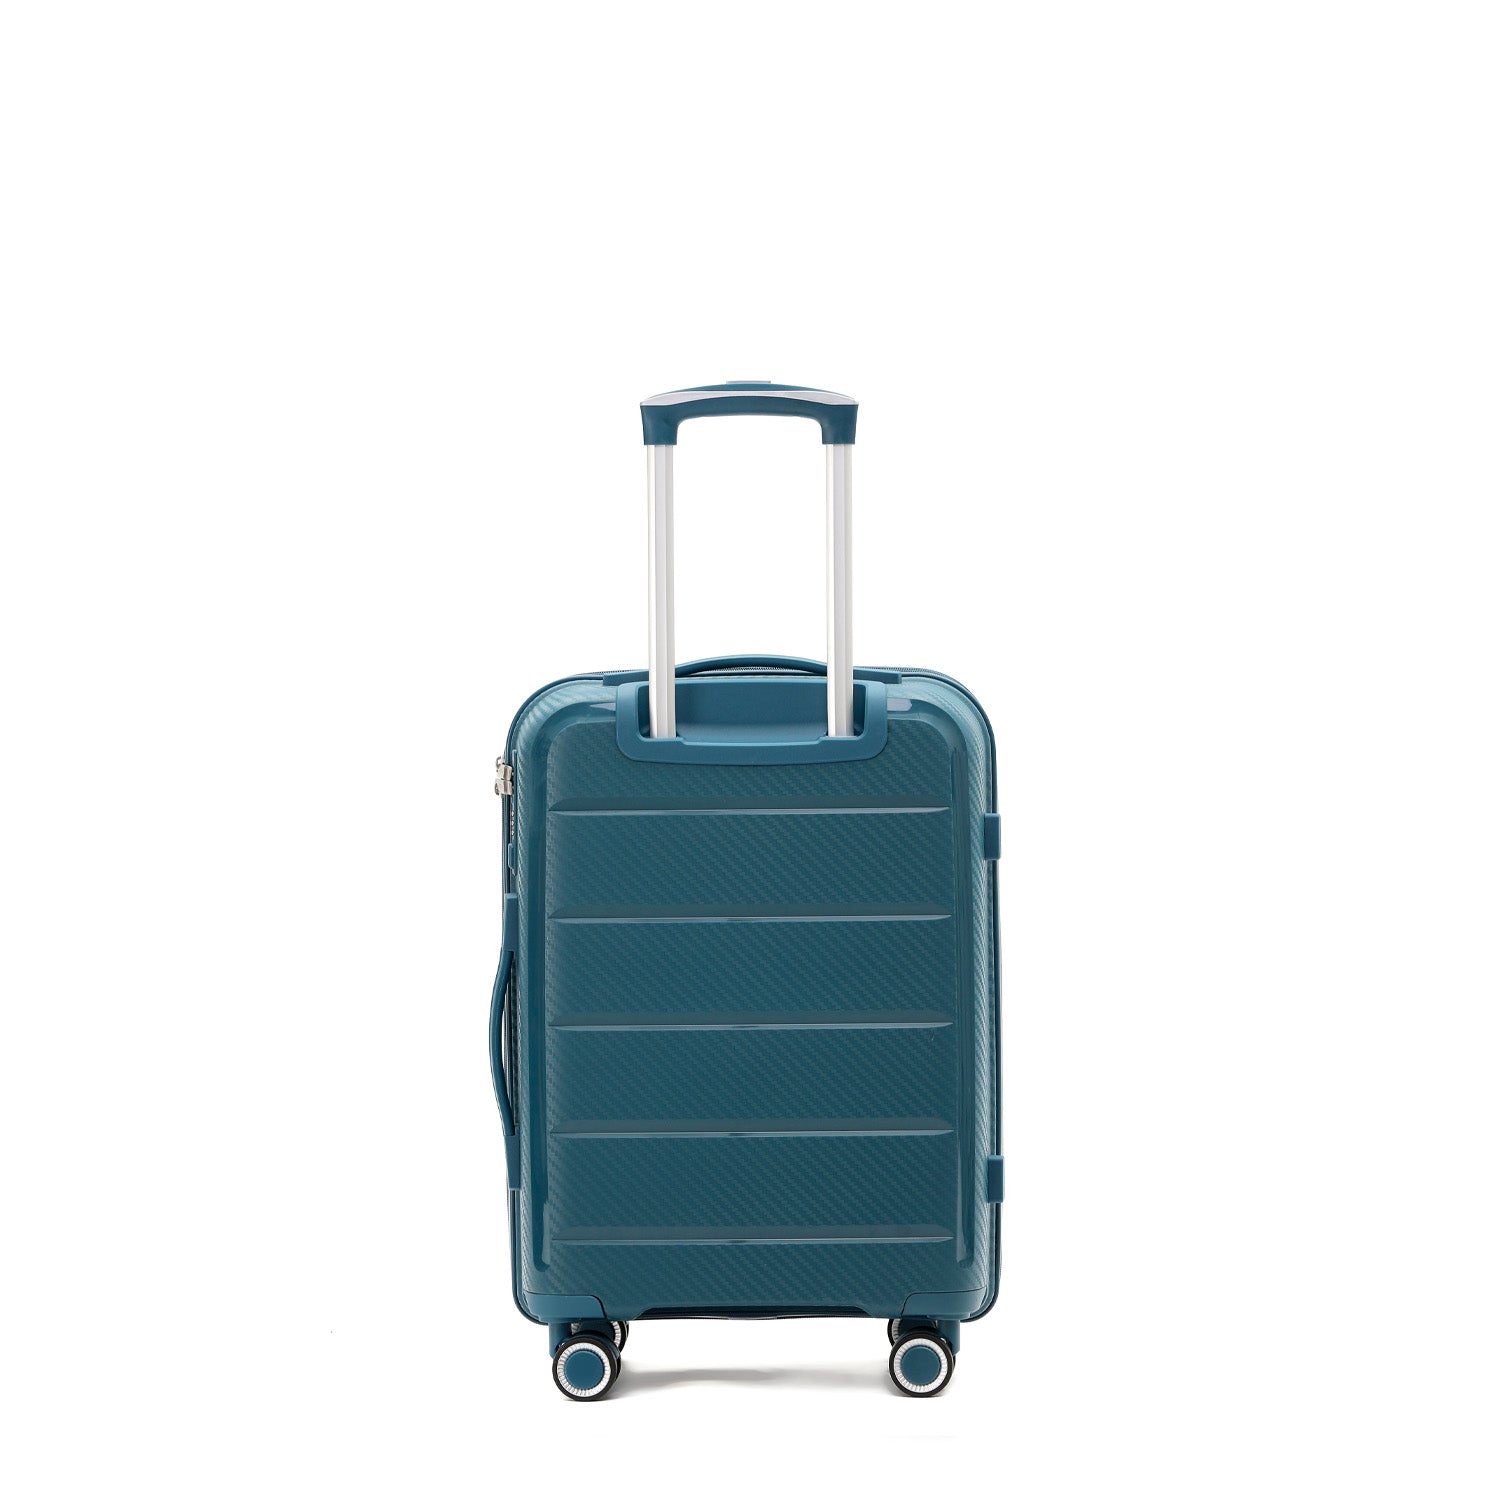 Paklite - PA7350 small spinner suitcase - Blue-2